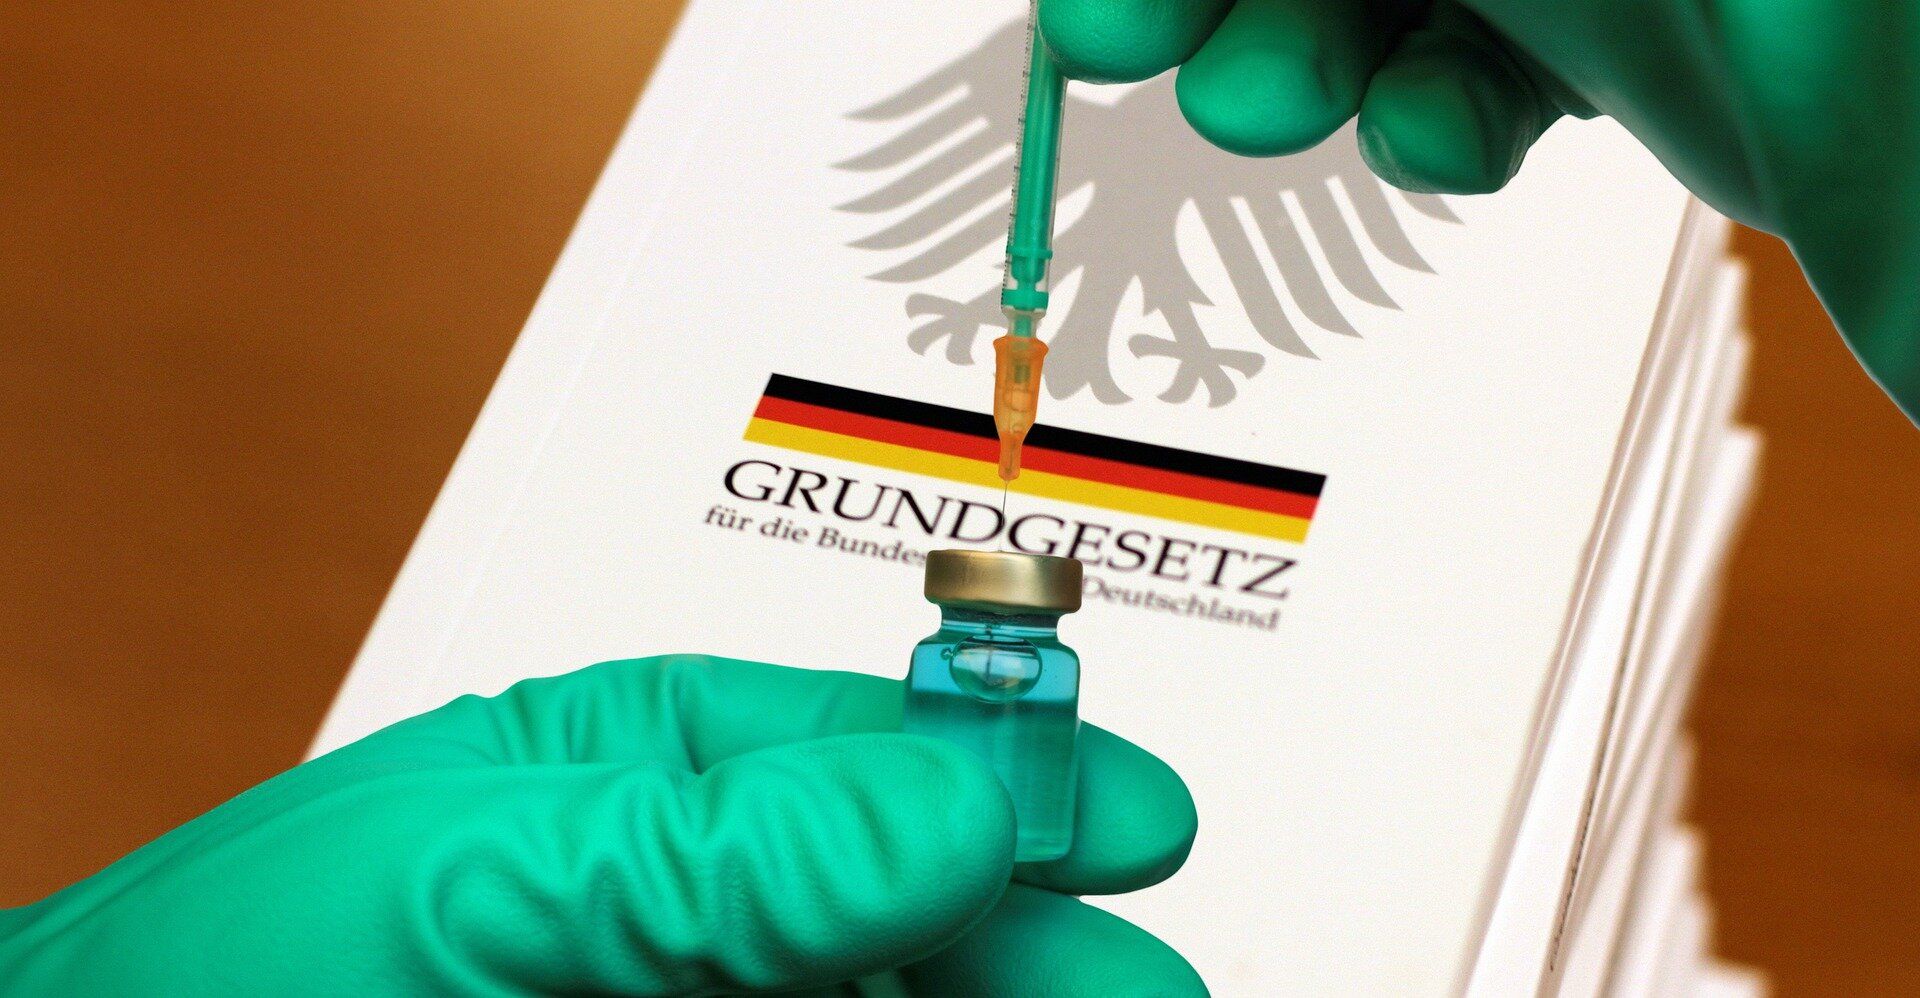 German Study Finds Covid Vaccine Has 'No Beneficial Effects' While Massively Increasing Excess Deaths